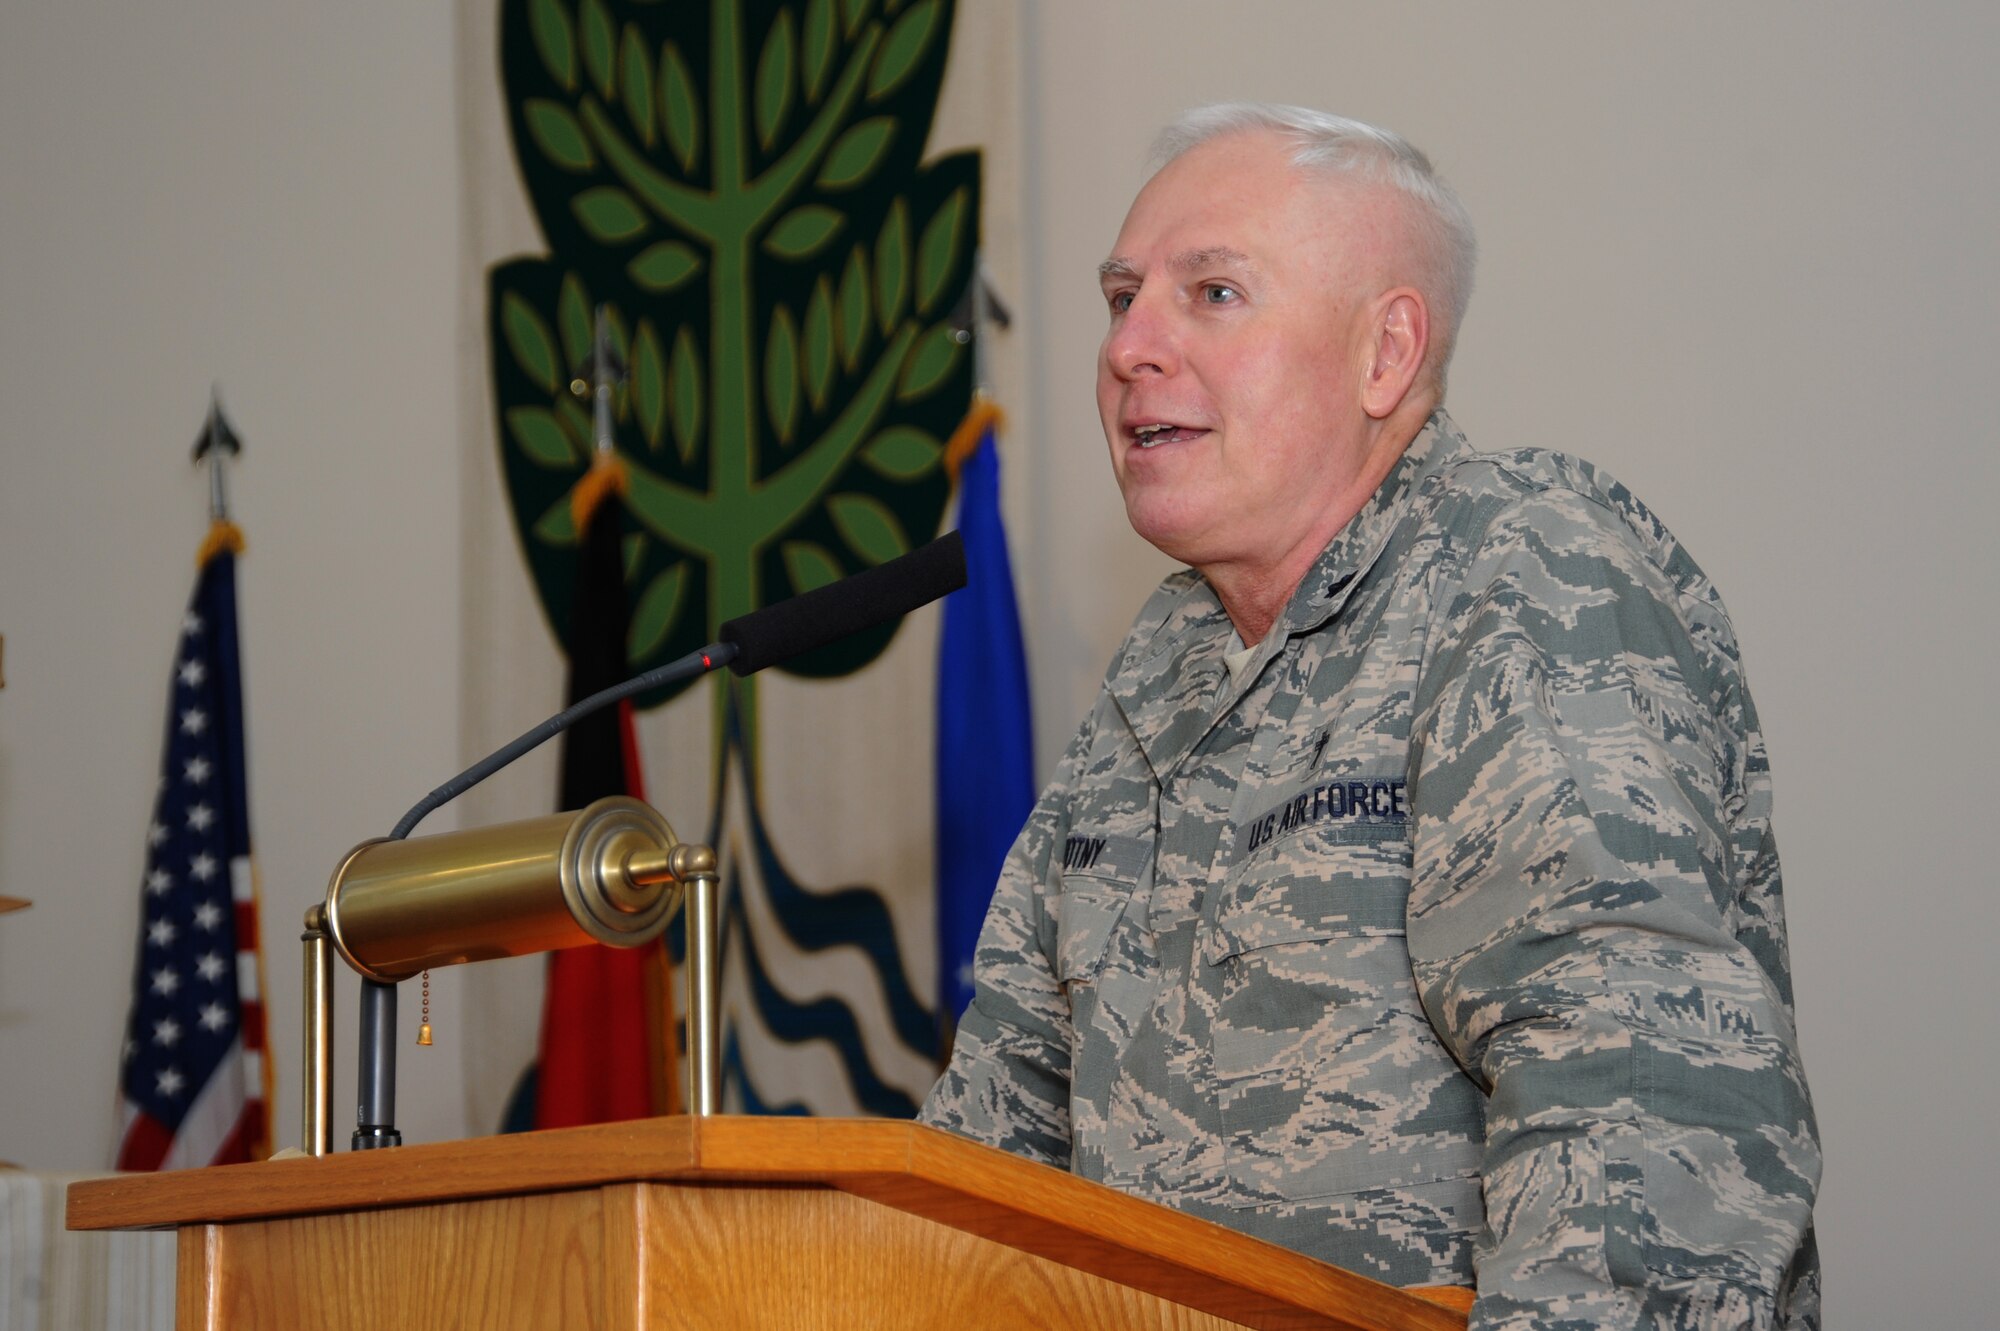 U.S. Air Force Lt. Col. Richard Novotny, 52nd Fighter Wing Chaplain, speaks at the National Prayer Breakfast March 14, 2014, in the base chapel at Spangdahlem Air Base, Germany. The 52nd Fighter Wing Chaplain Corps sponsored the event, themed “Prayer for the Future.” (U.S. Air Force photo by Airman 1st Class Dylan Nuckolls/Released)